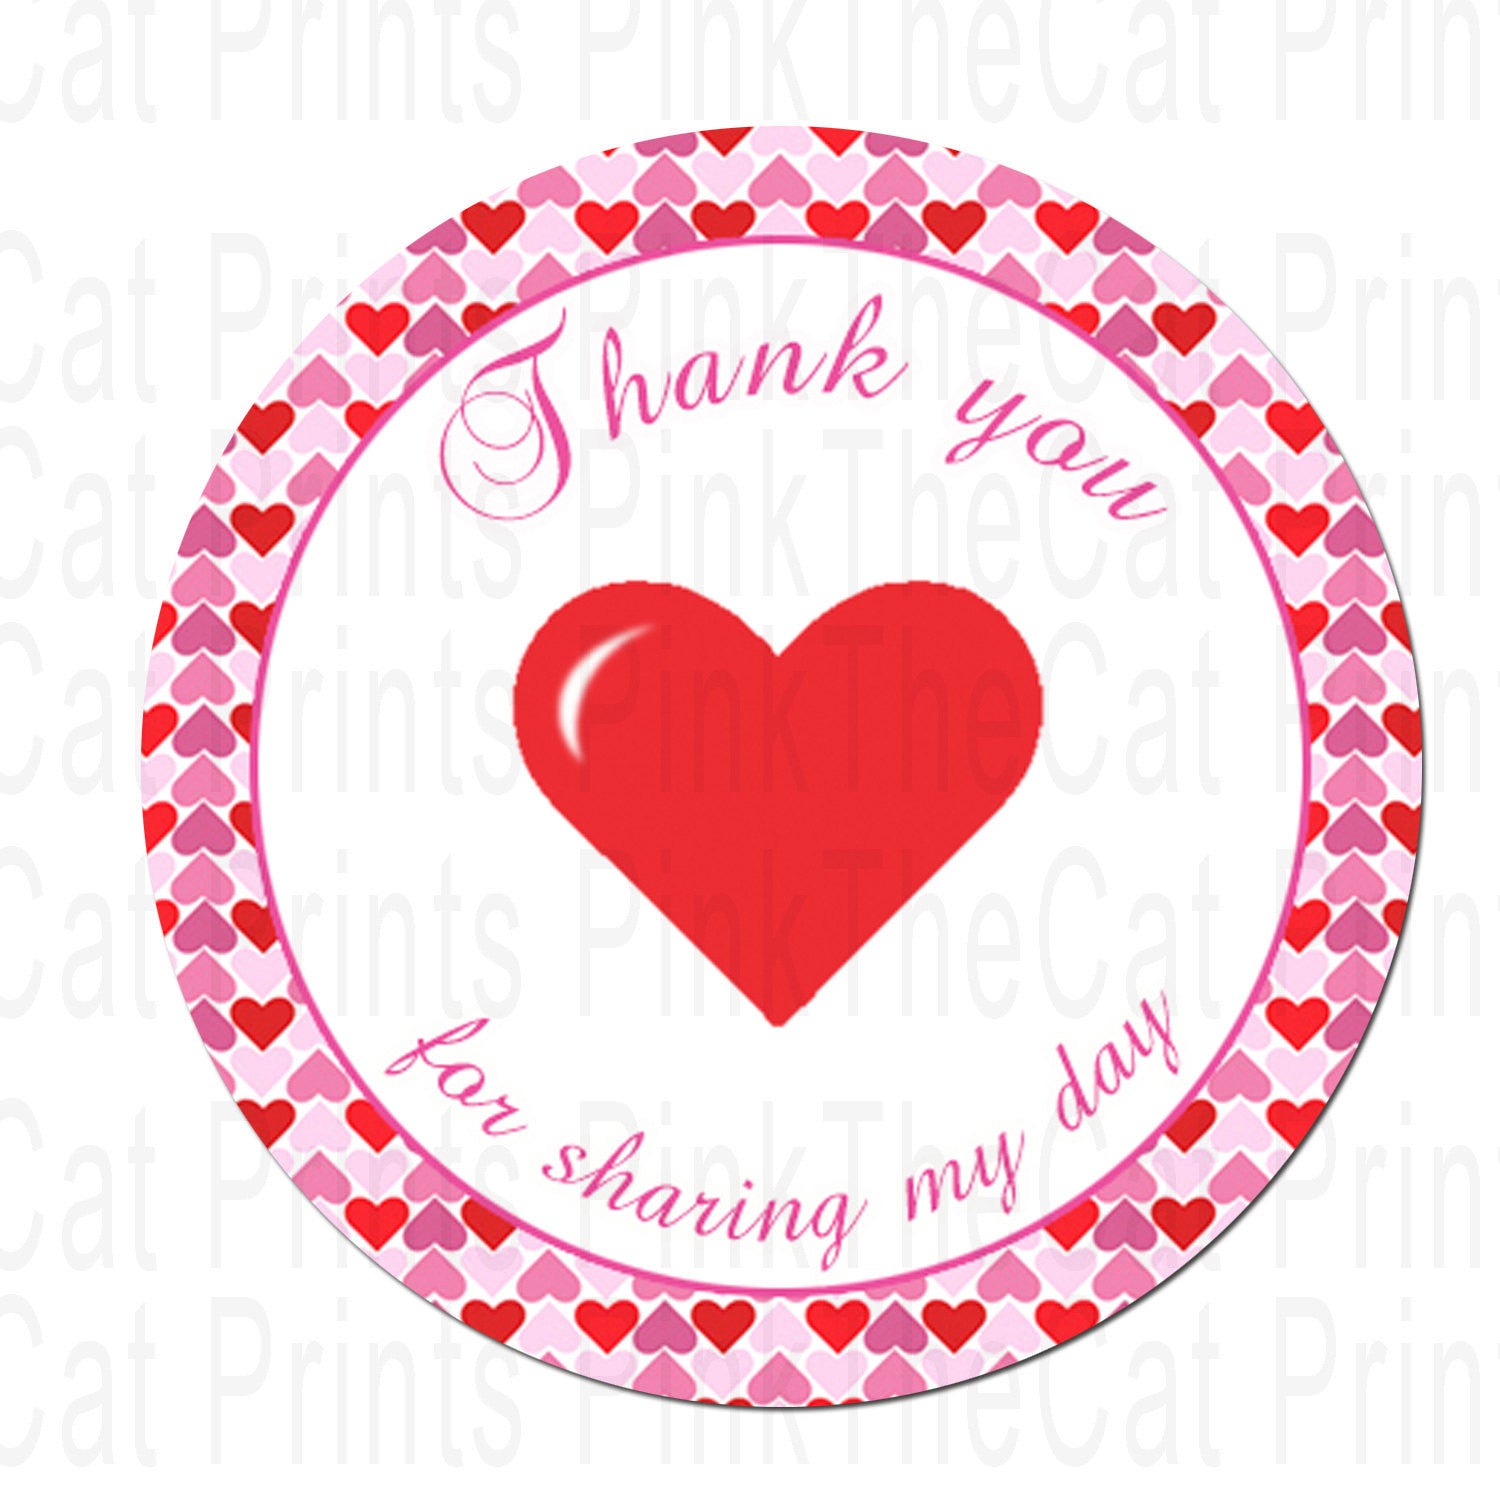 INSTANT DOWNLOAD Printable Valentines Inspired Party Thank You Tag - Girl Baby Shower Favors Birthday Party Favors Party Circle Stickers